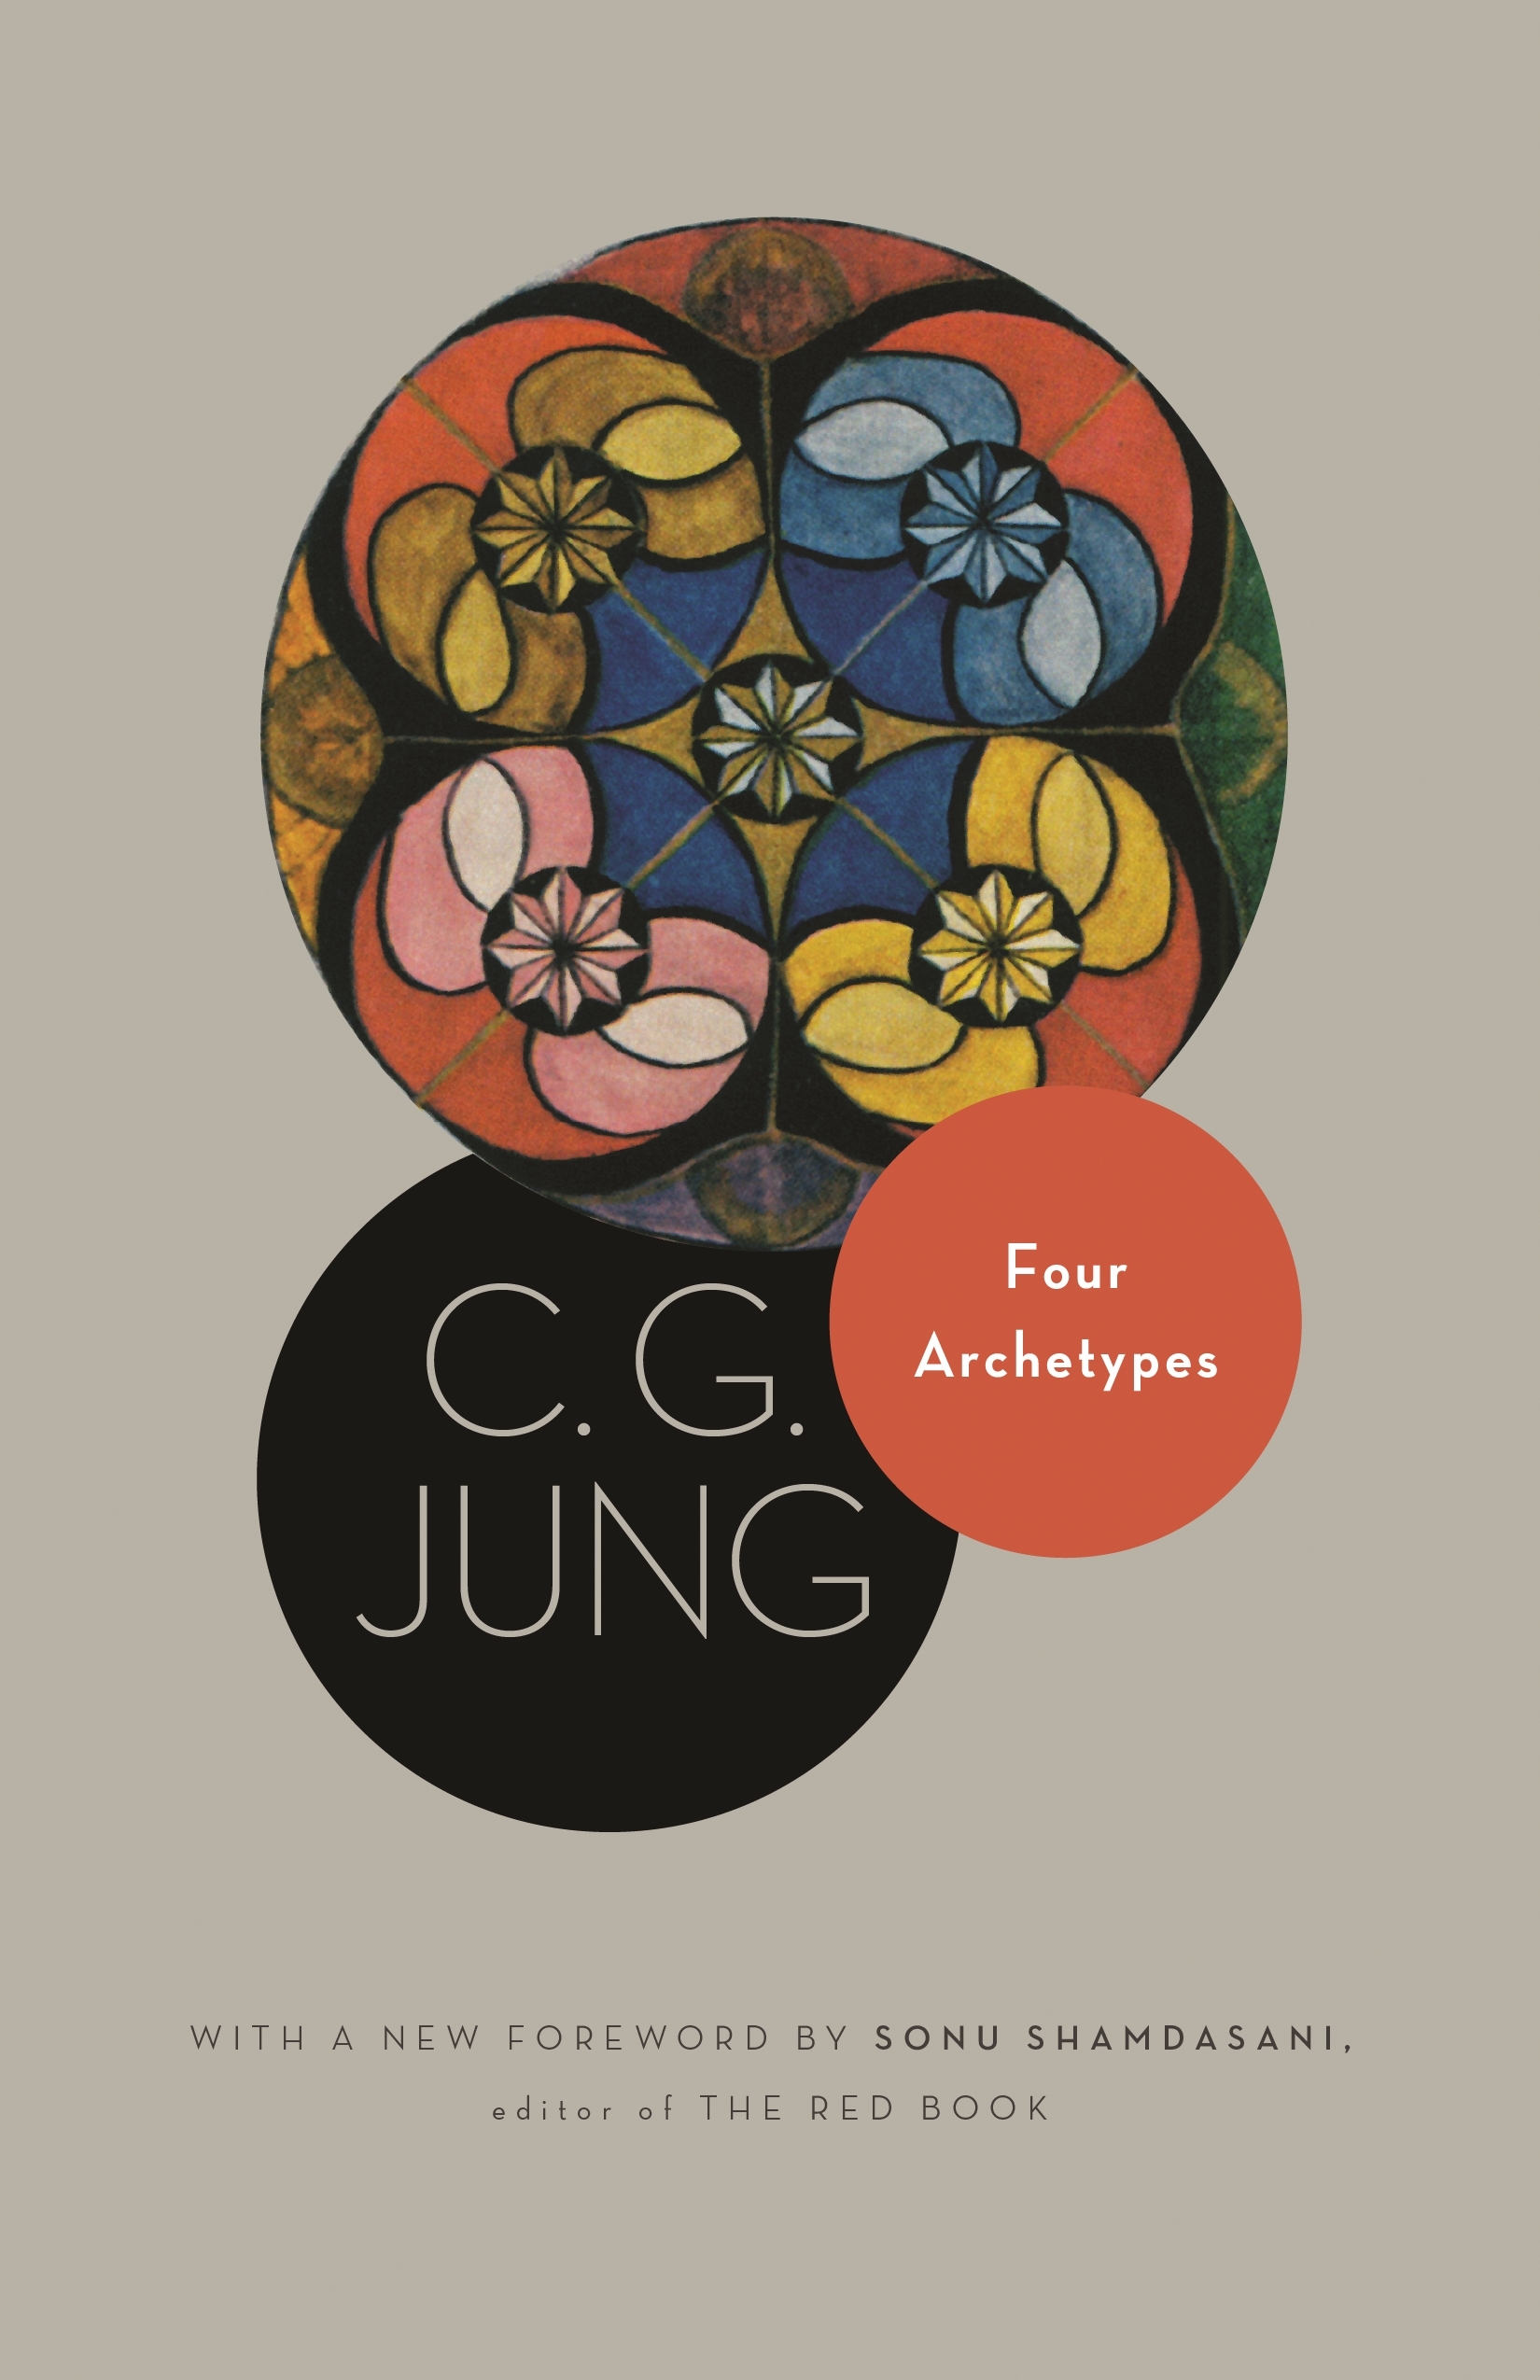 From Vol. 9, Part 1 of the Collected Works of C. G. Jung: Four Archetypes